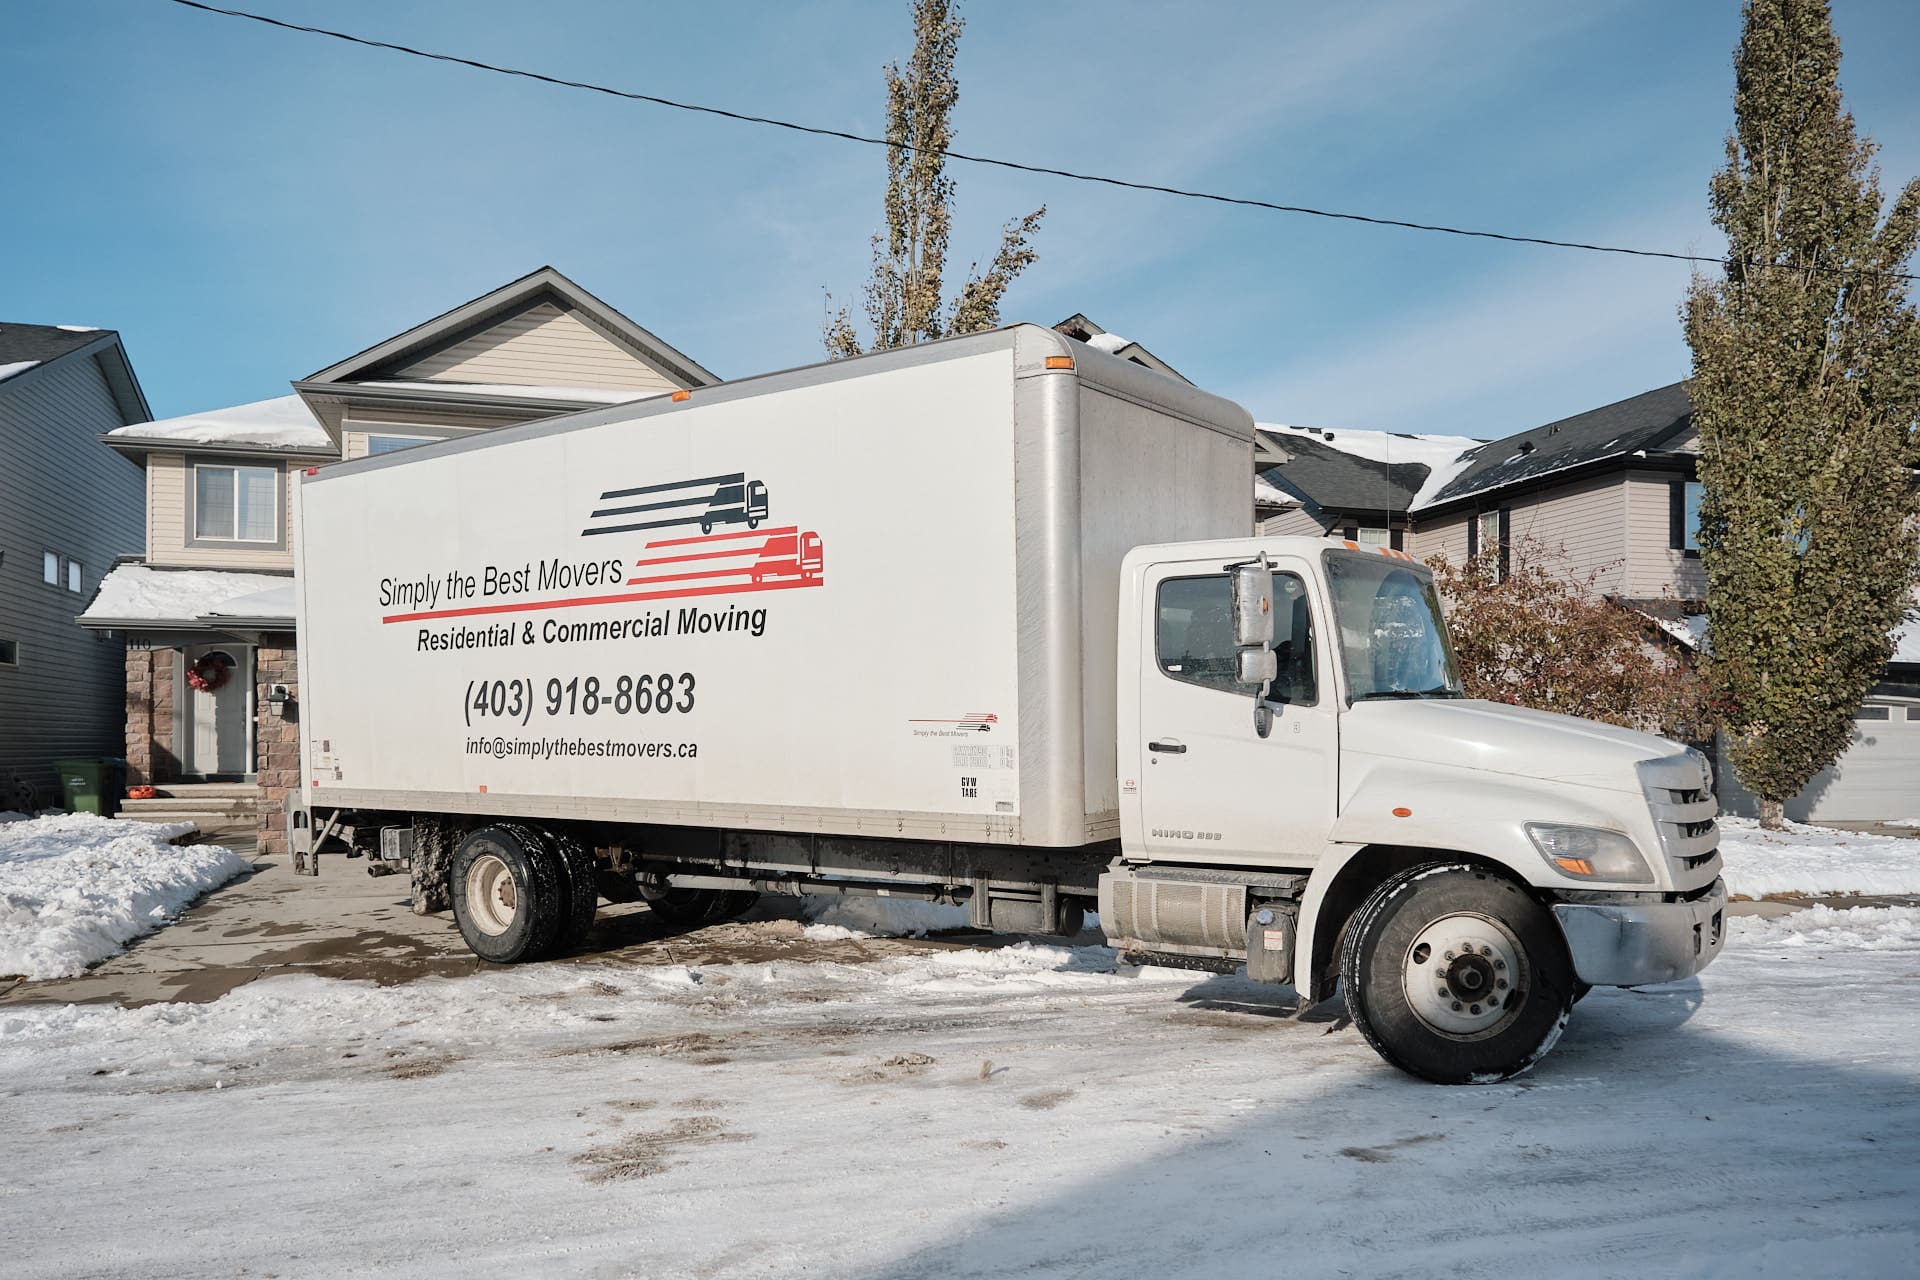 Airdrie Movers Truck